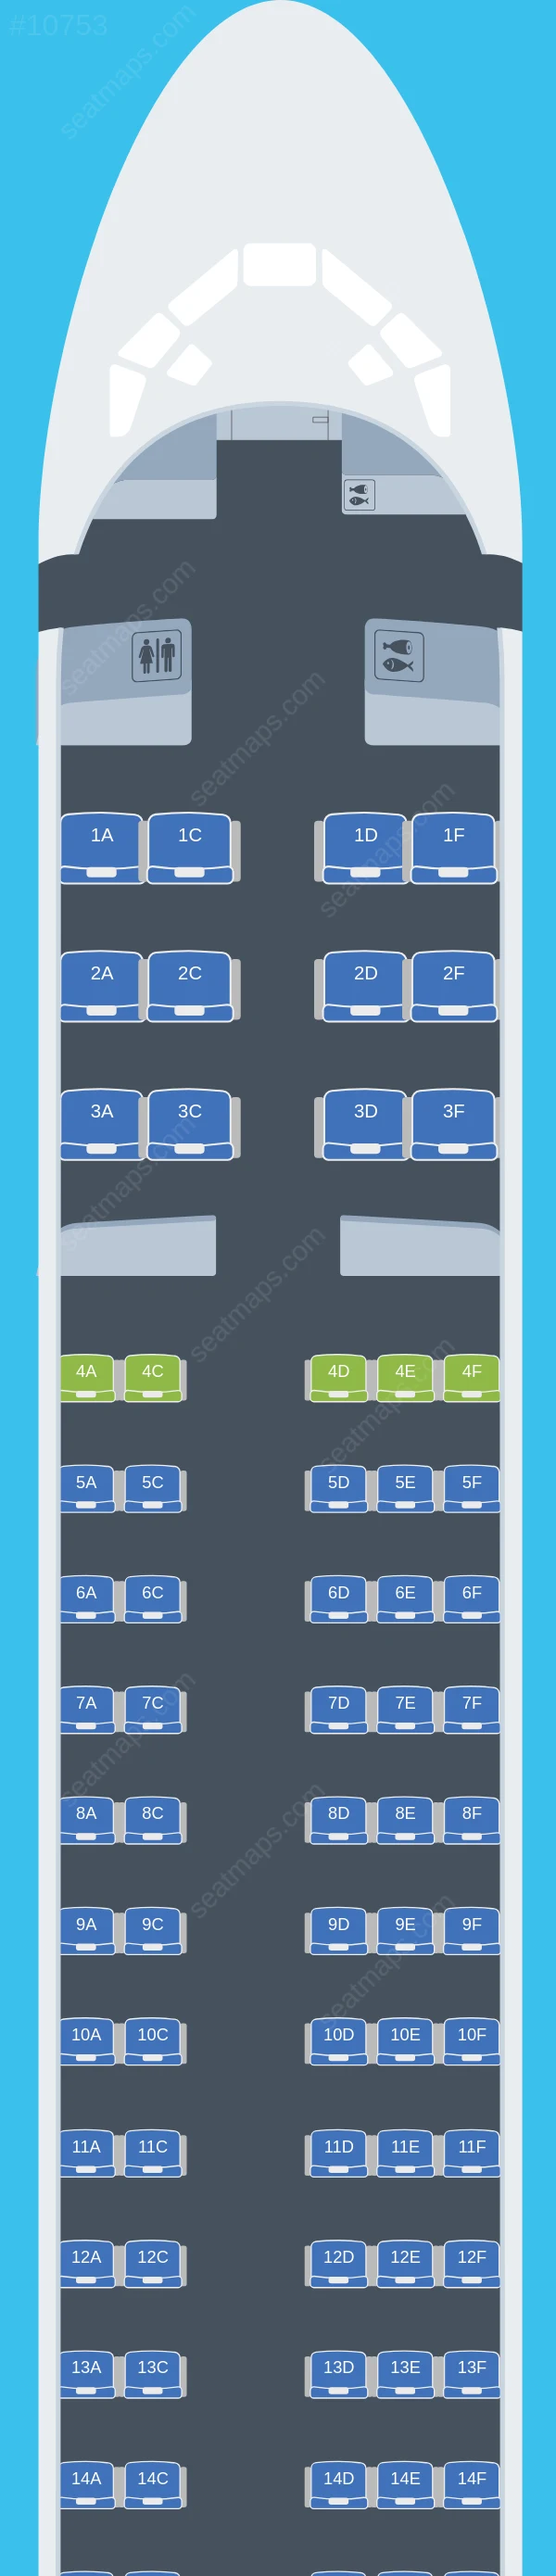 RED Air McDonnell Douglas MD-82 seatmap preview